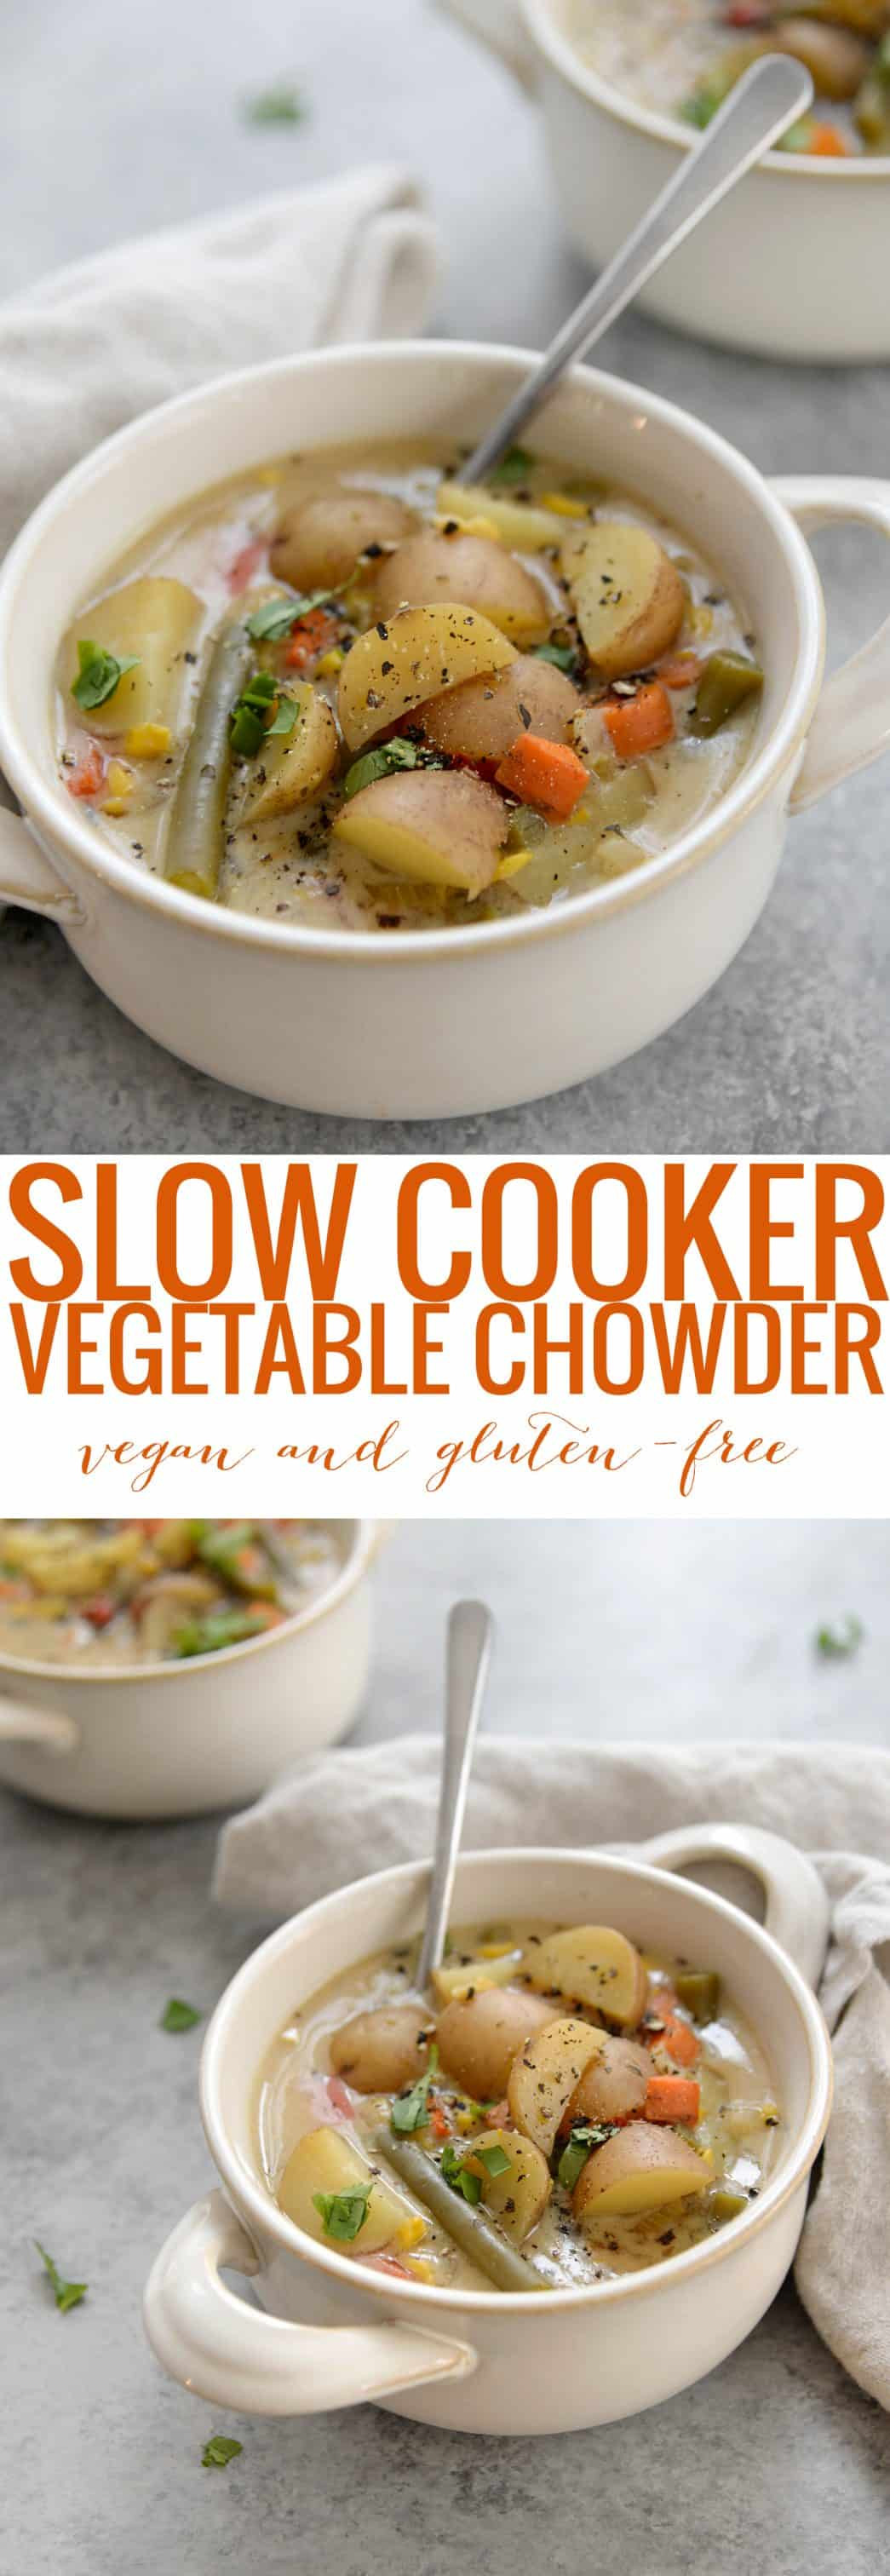 Slow Cooker Corn Chowder Vegetarian
 ve able chowder slow cooker